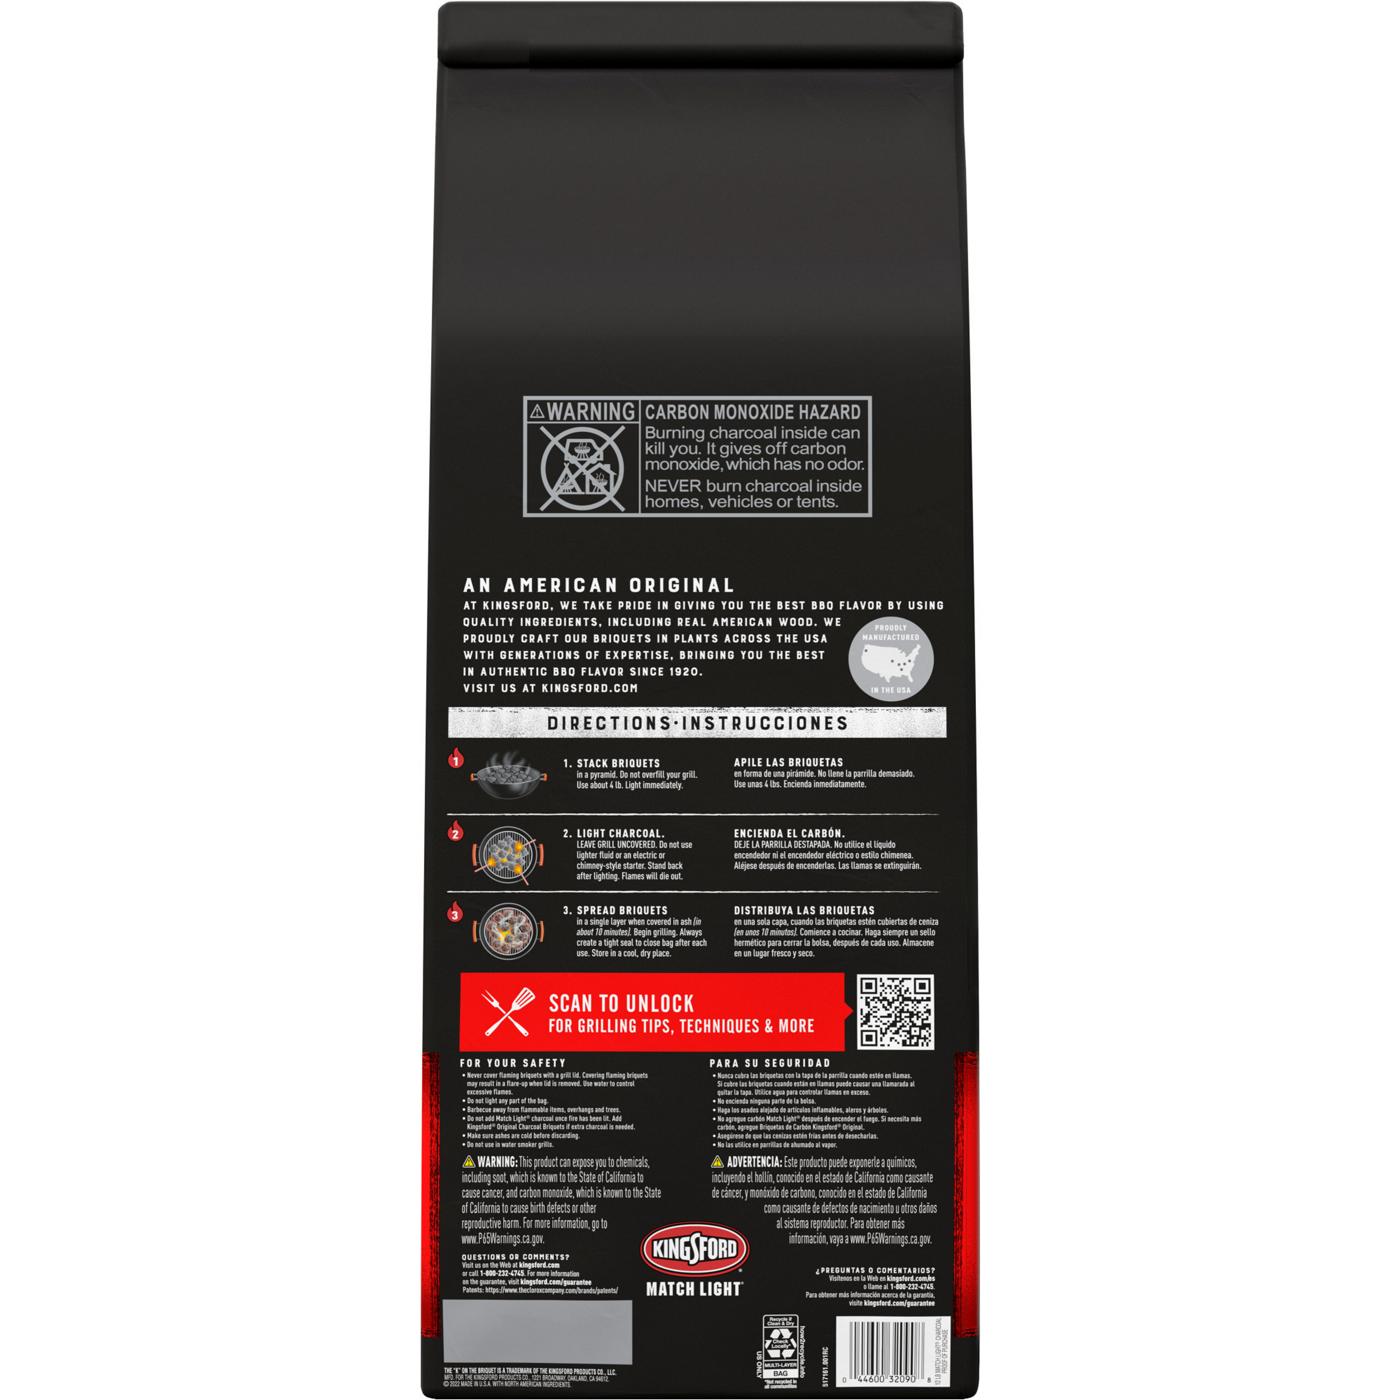 Kingsford Match Light Instant Charcoal Briquettes, BBQ Charcoal for Grilling; image 4 of 11